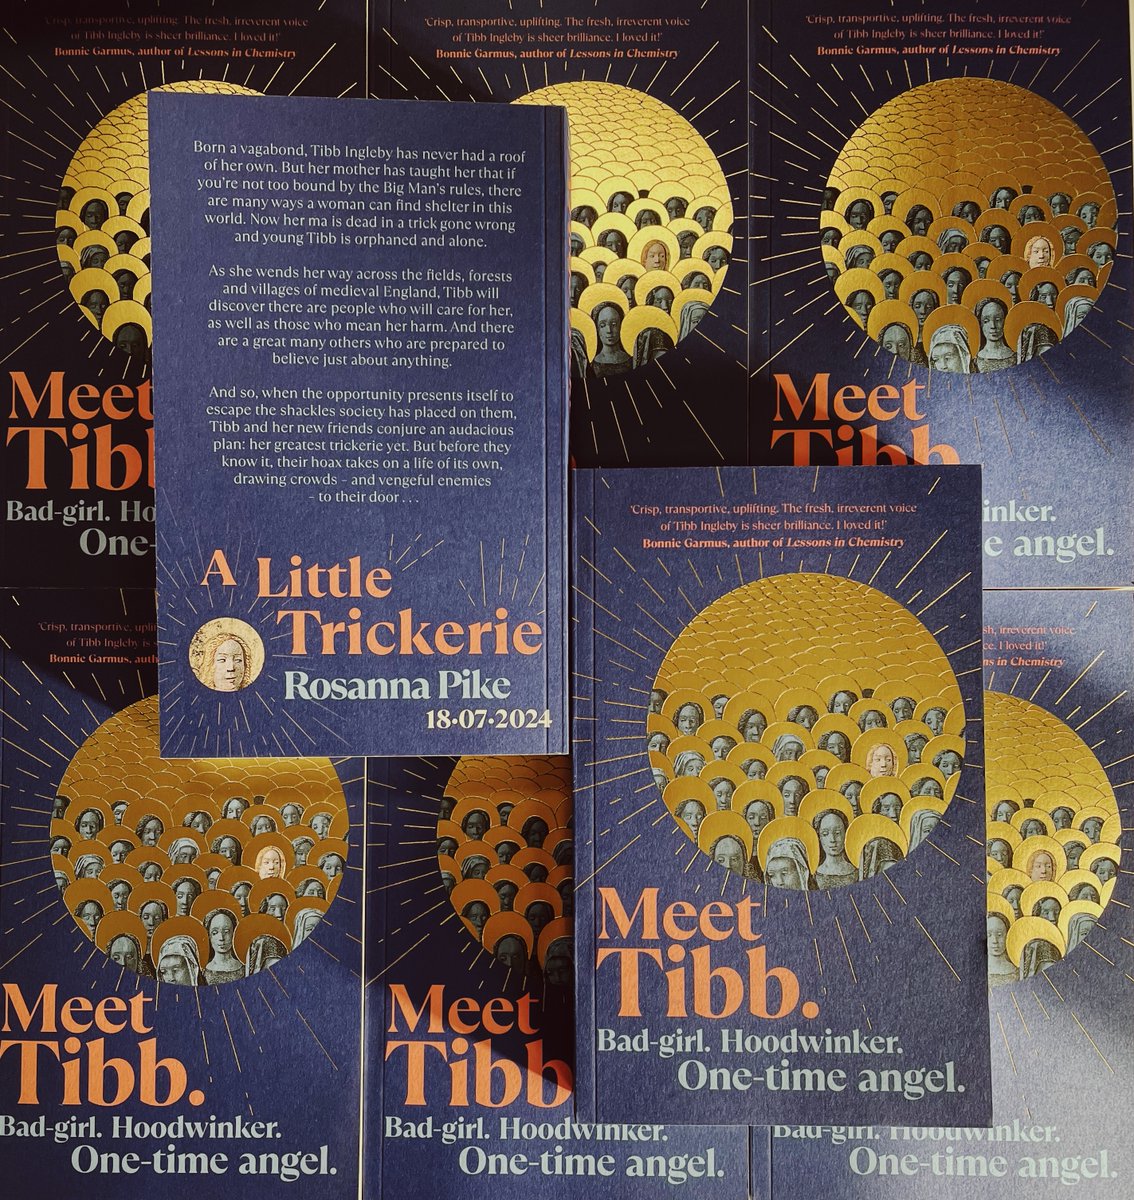 In Rosanna Pike's utterly audacious debut novel, #ALittleTrickerie, loveable protagonist Tibb - bad-girl, hoodwinker and one-time angel - wends her way across medieval England. SO, this week we're wending our way across England too, introducing Tibb to booksellers!